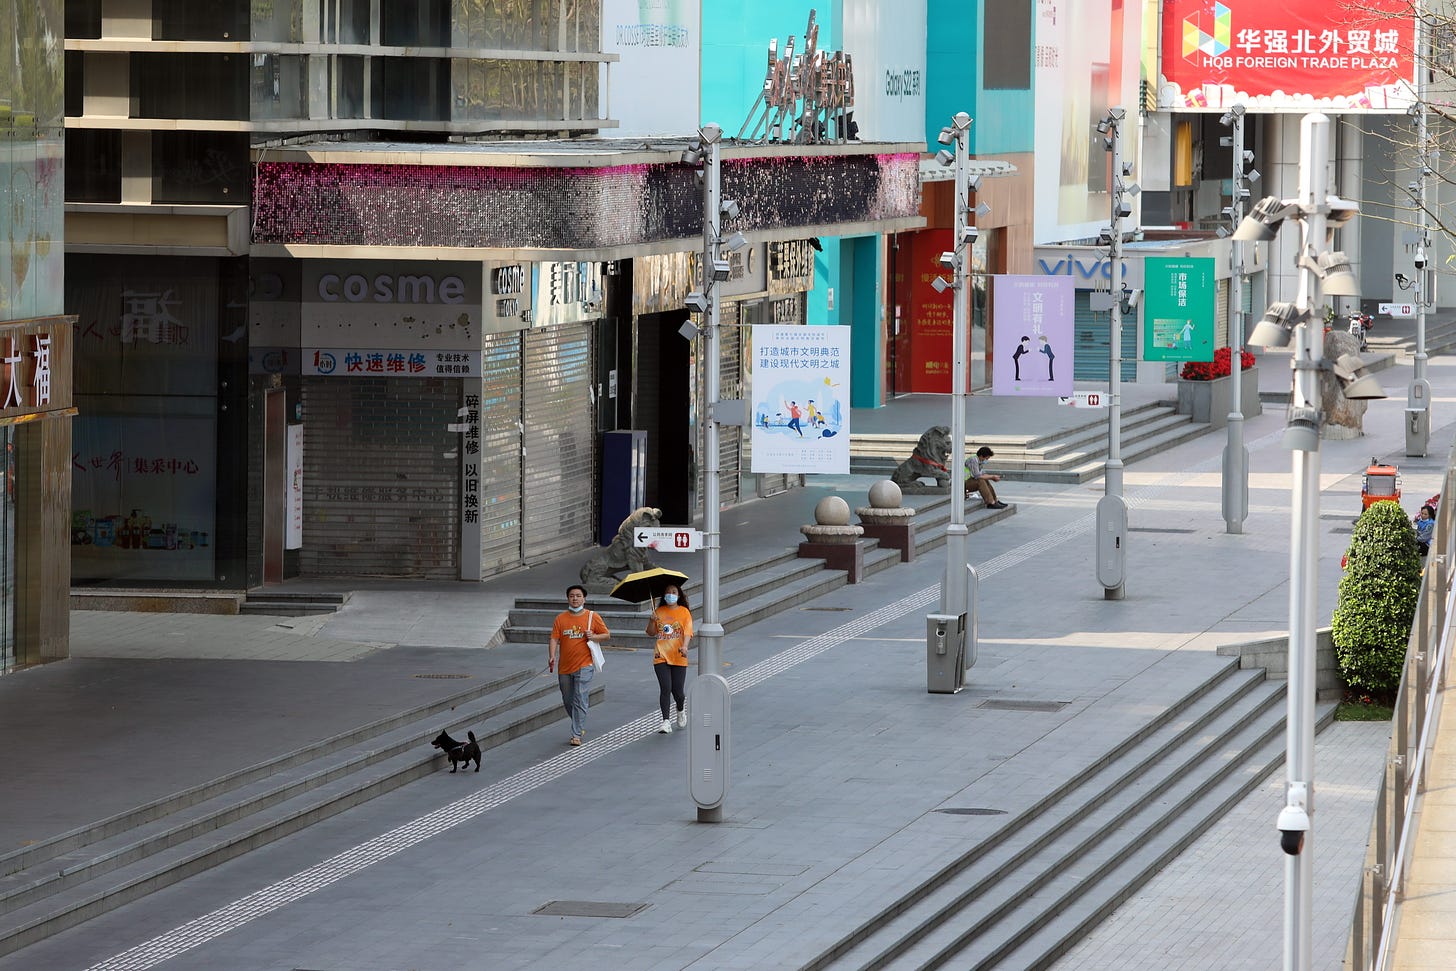 SHENZHEN, CHINA - MARCH 14 2022: Two women walk by closed shops in Huaqiangbei area, the world's biggest electronics market, in Shenzhen in south China's Guangdong province Monday, March 14, 2022. The city, an economic powerhouse bordering Hong Kong, went into the Covid-19 lockdown on Sunday. (Photo credit should read Feature China/Future Publishing via Getty Images)